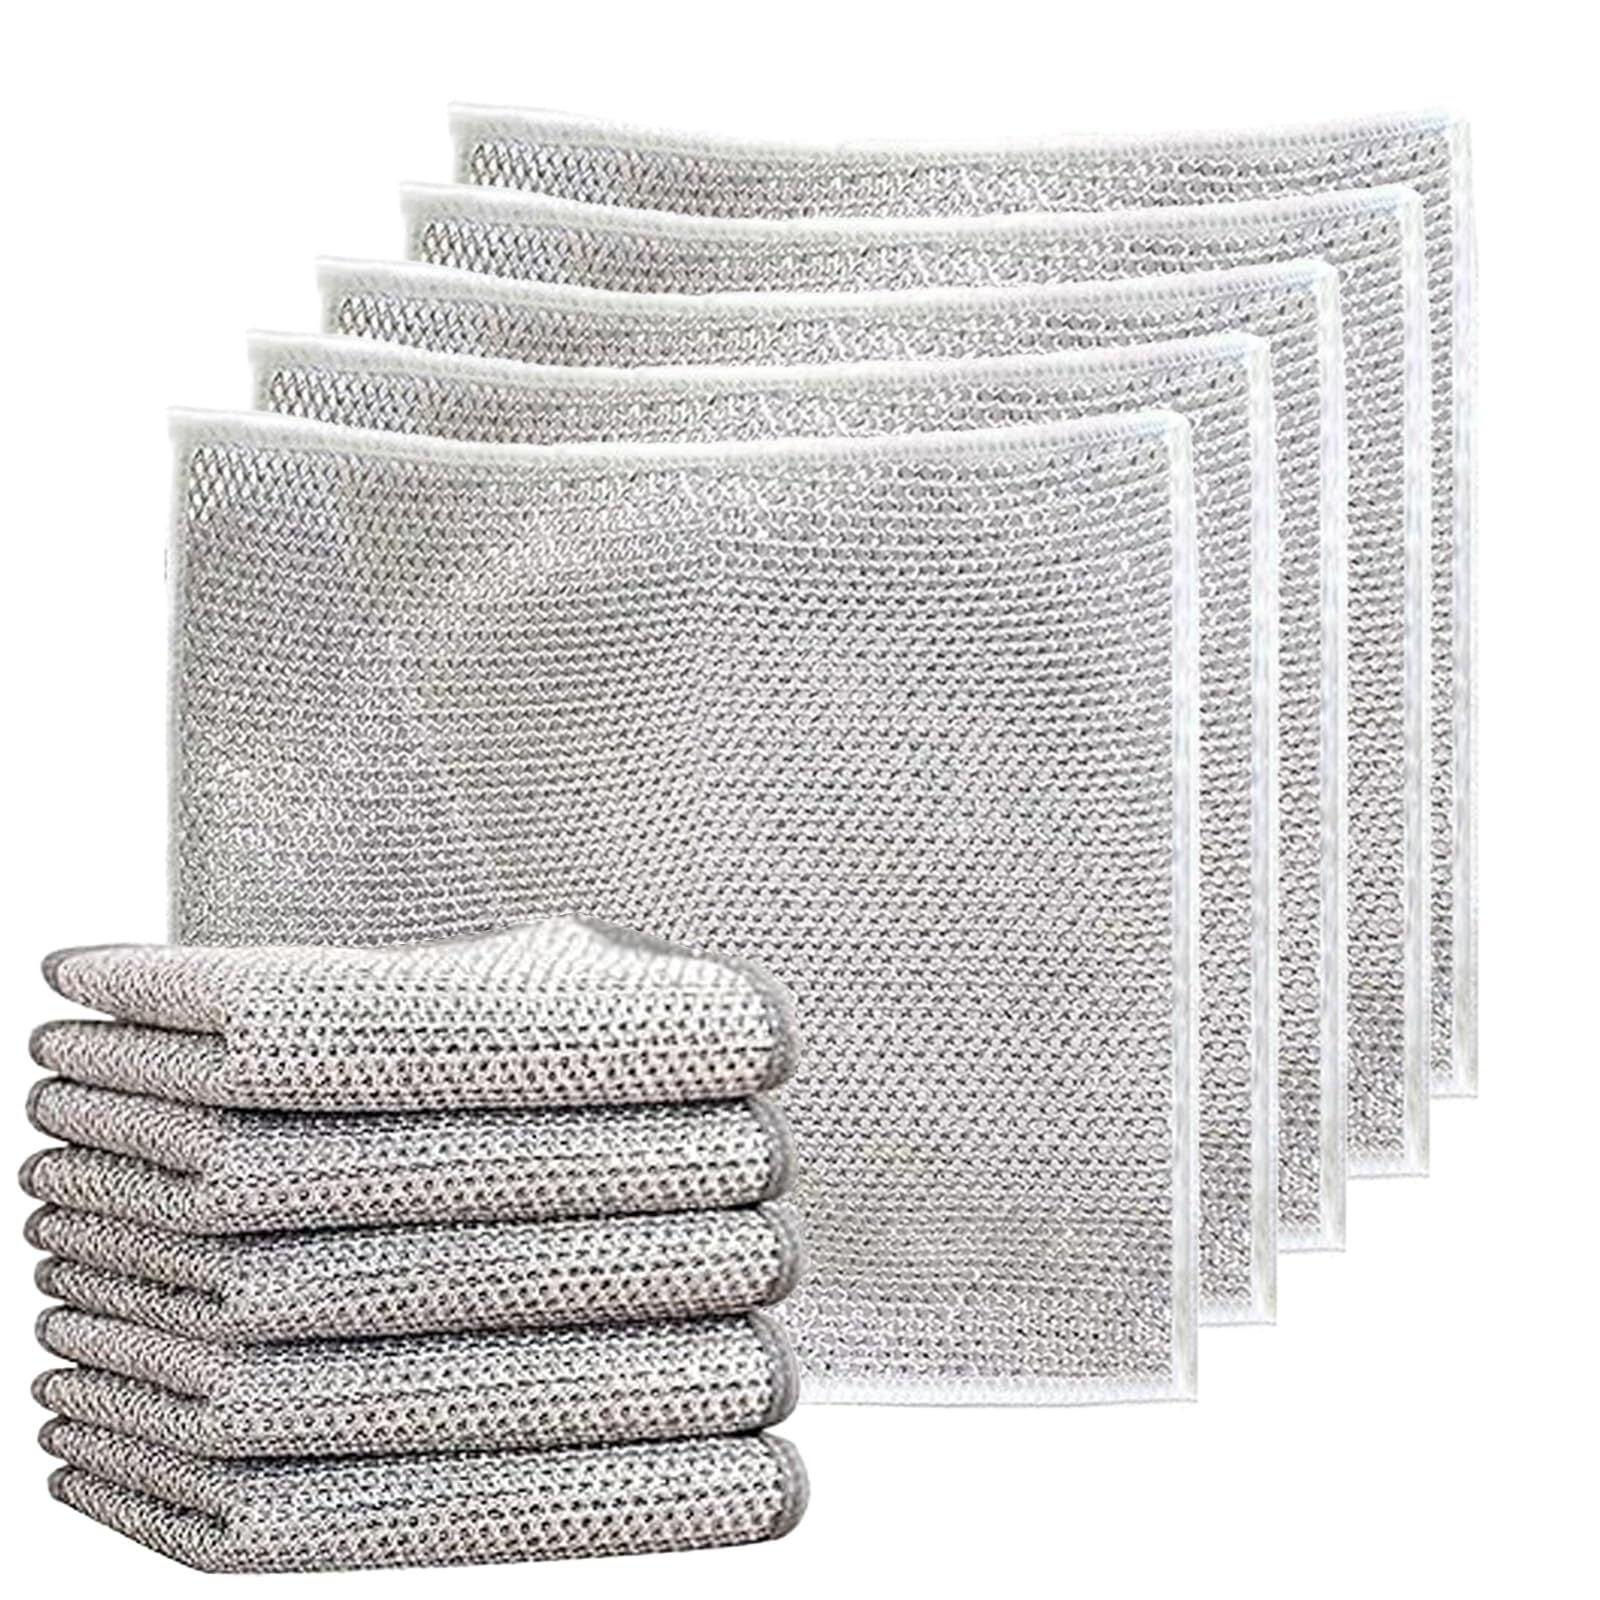 Rust Removal Most Hygienic Dish Cloths Magic Dishwashing Towel For Kitchen,  Microwave Stove, And Metal Wire Cleaner Rag From Hometoday, $4.19